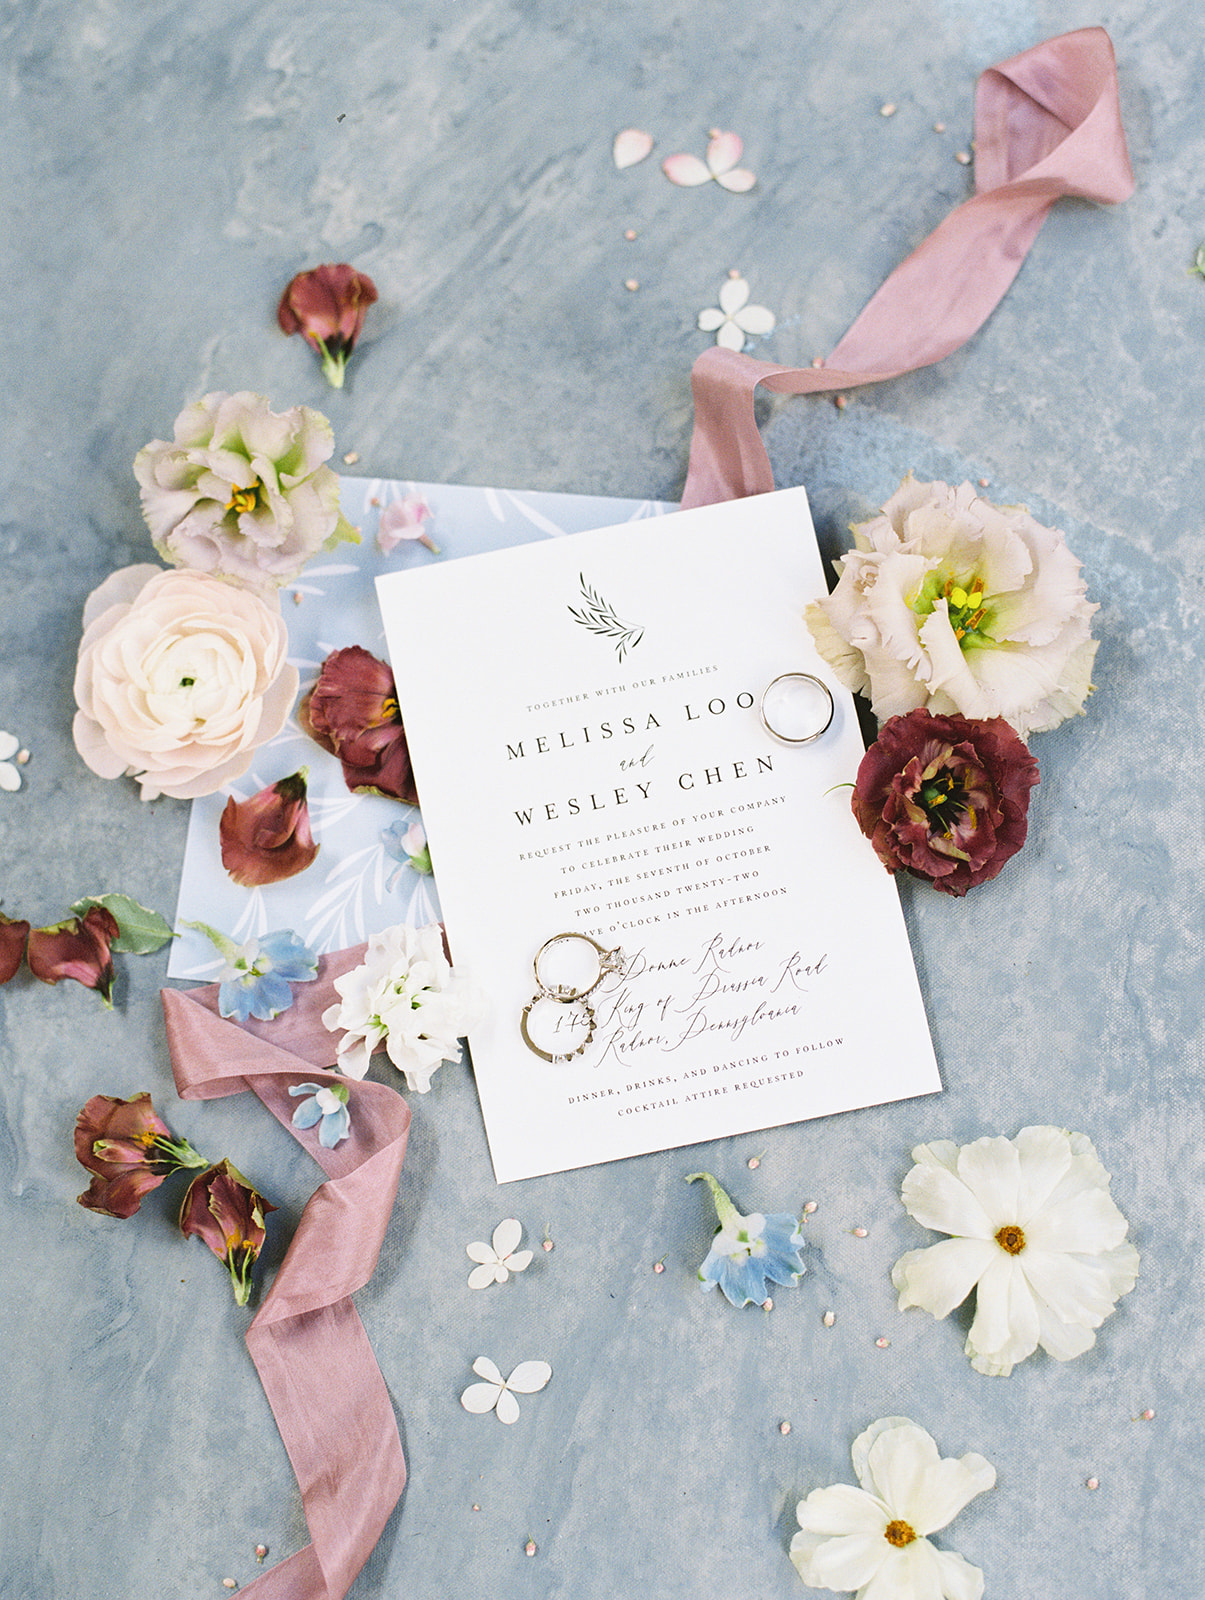 rings sit on invitation with white and burgundy flowers on painted french blue surface